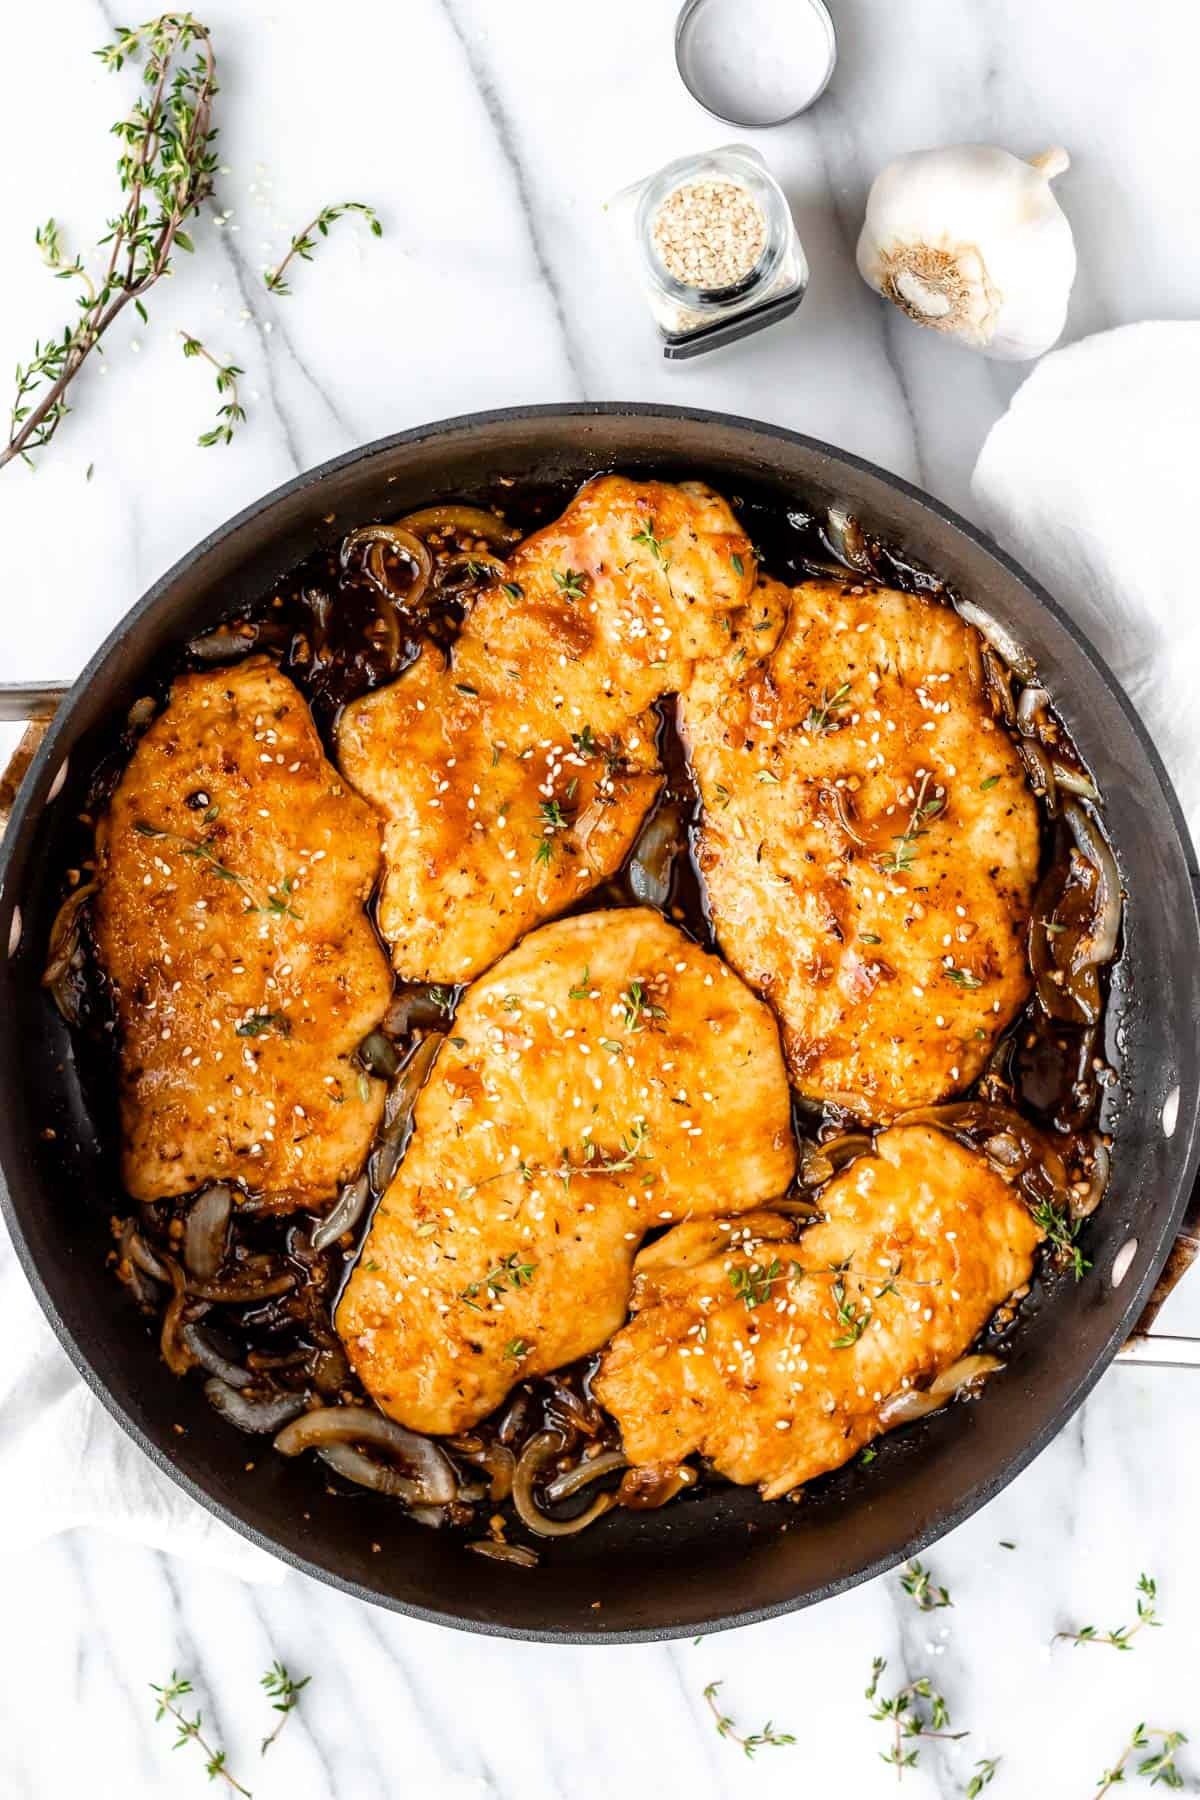 Five cooked chicken breasts in apricot sauce with onions in a black skillet with fresh thyme, garlic and a container of sesame seeds around it.